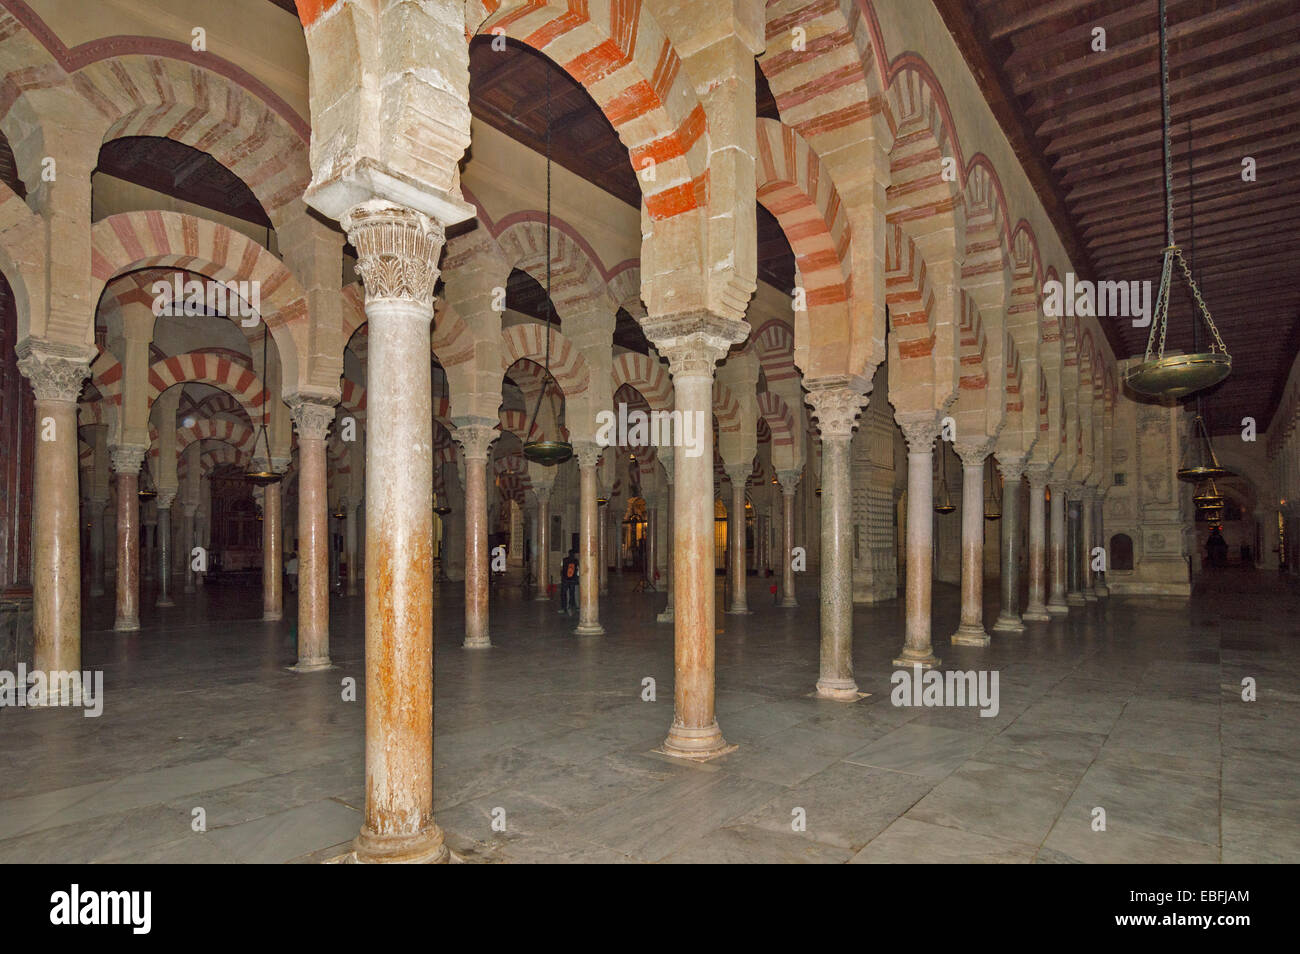 CORDOBA THE MOSQUE CATHEDRAL OR MEZQUITA SHOWING MULTIPLE ROWS OF COLUMNS AND ARCHES WITH RED COLOURED STONE Stock Photo